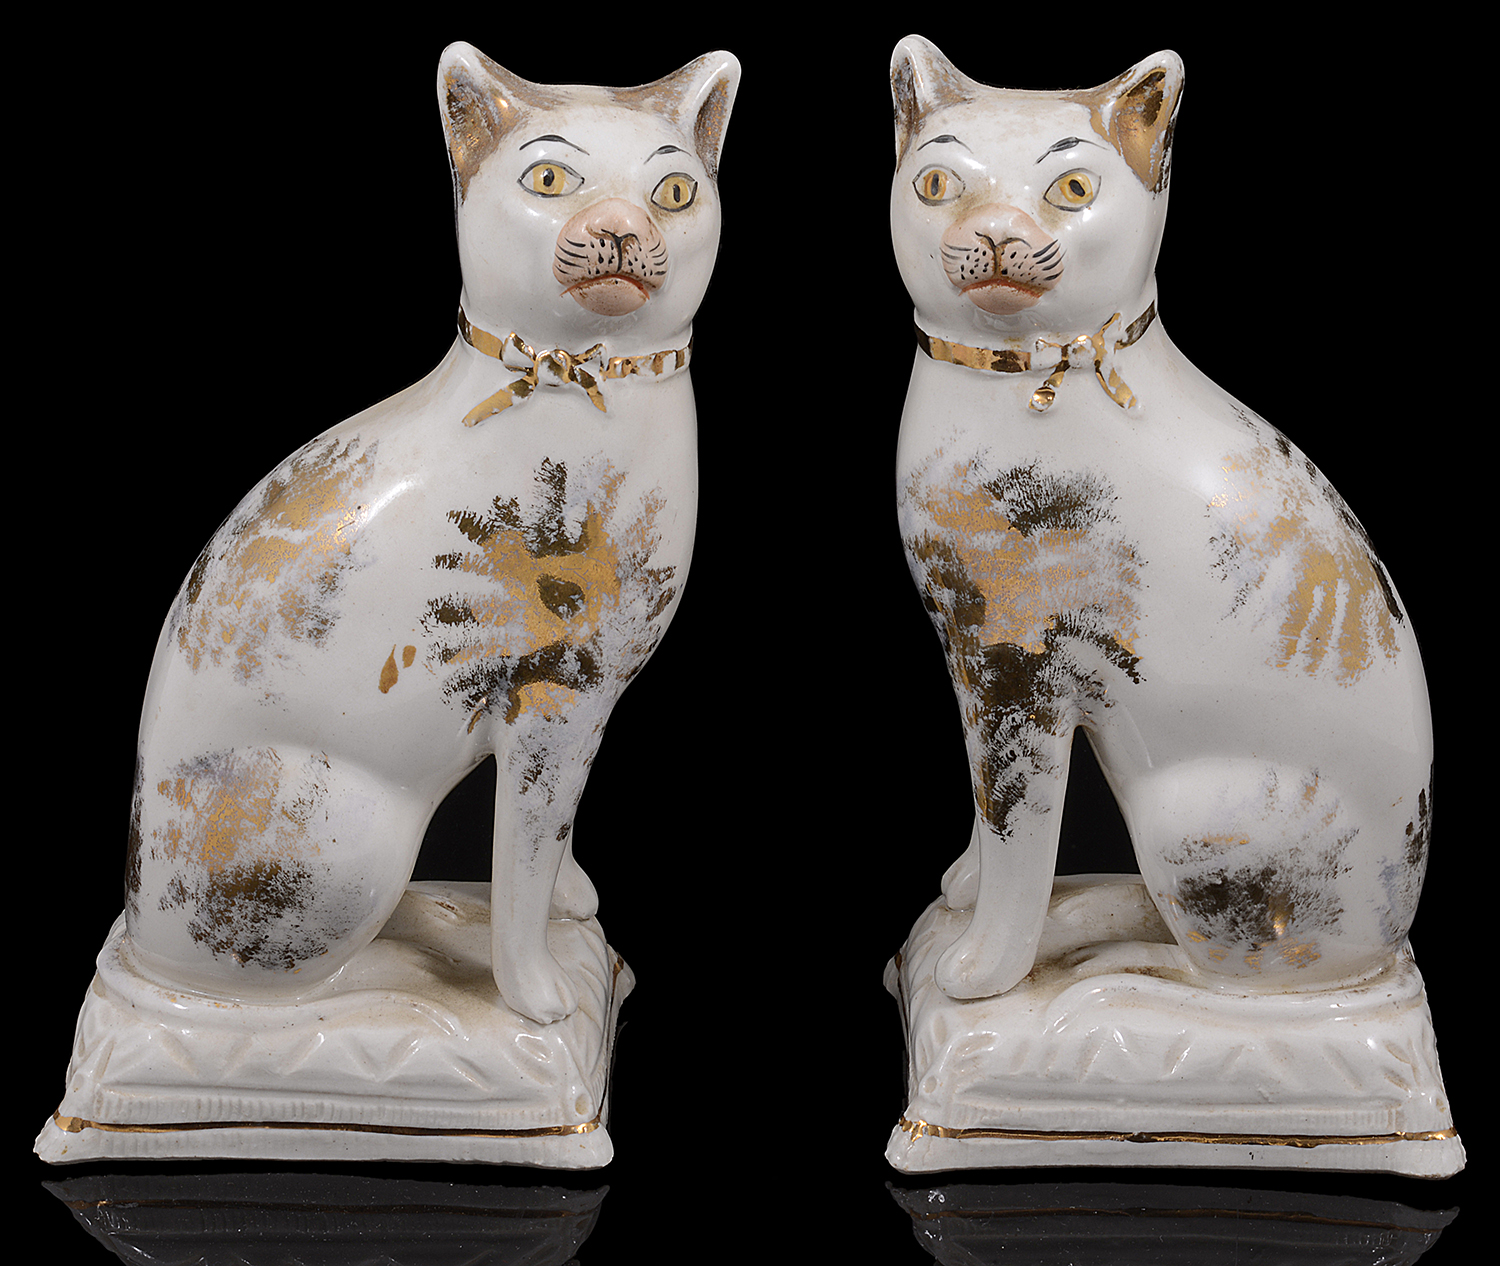 A pair of early 19th century Staffordshire pottery cats